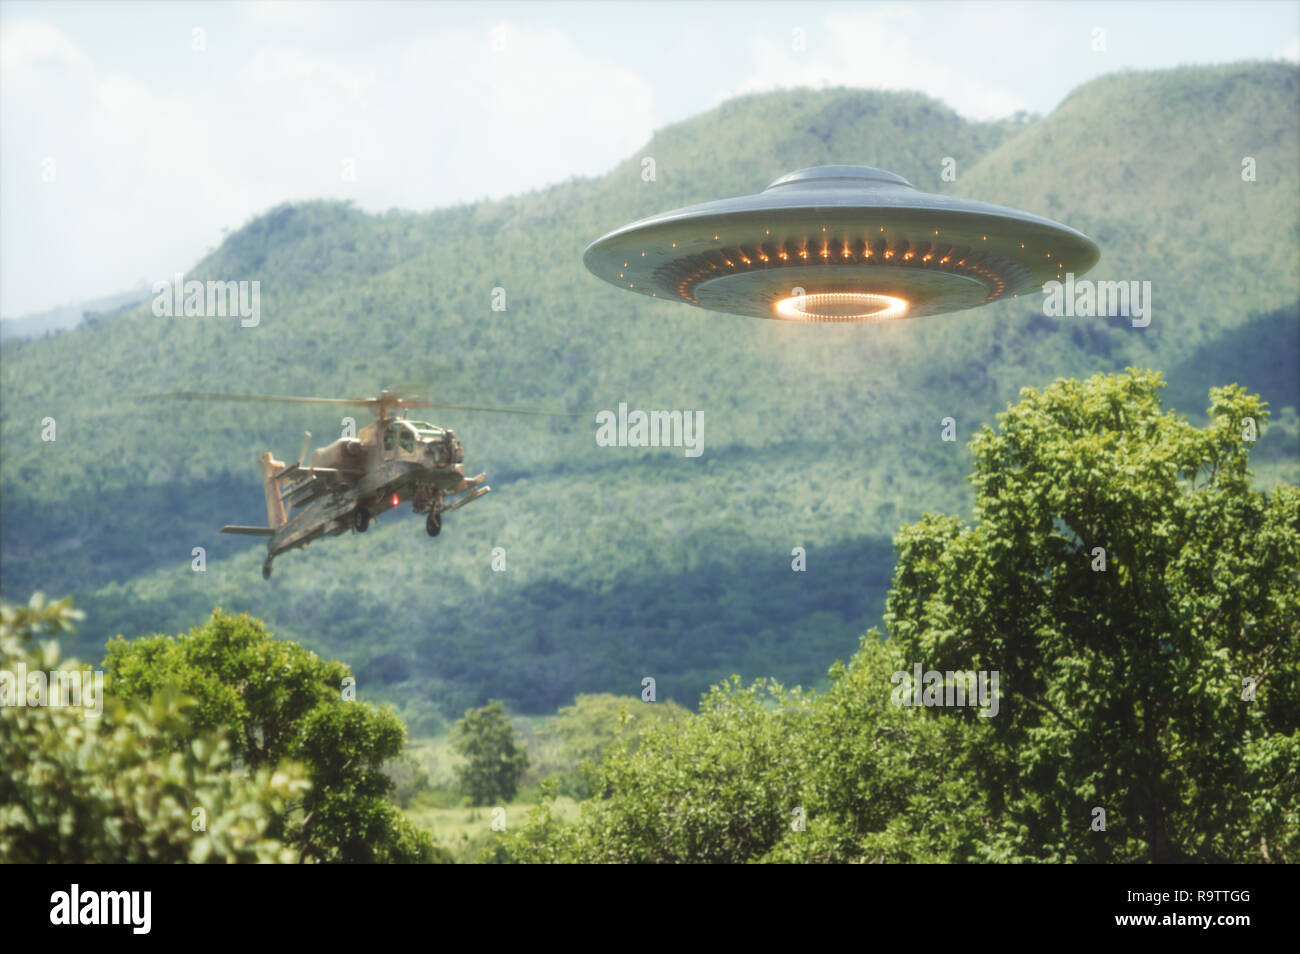 Military helicopter intercepting an unidentified flying object. Concept image of non-pacific invasion of beings from other planets. Stock Photo